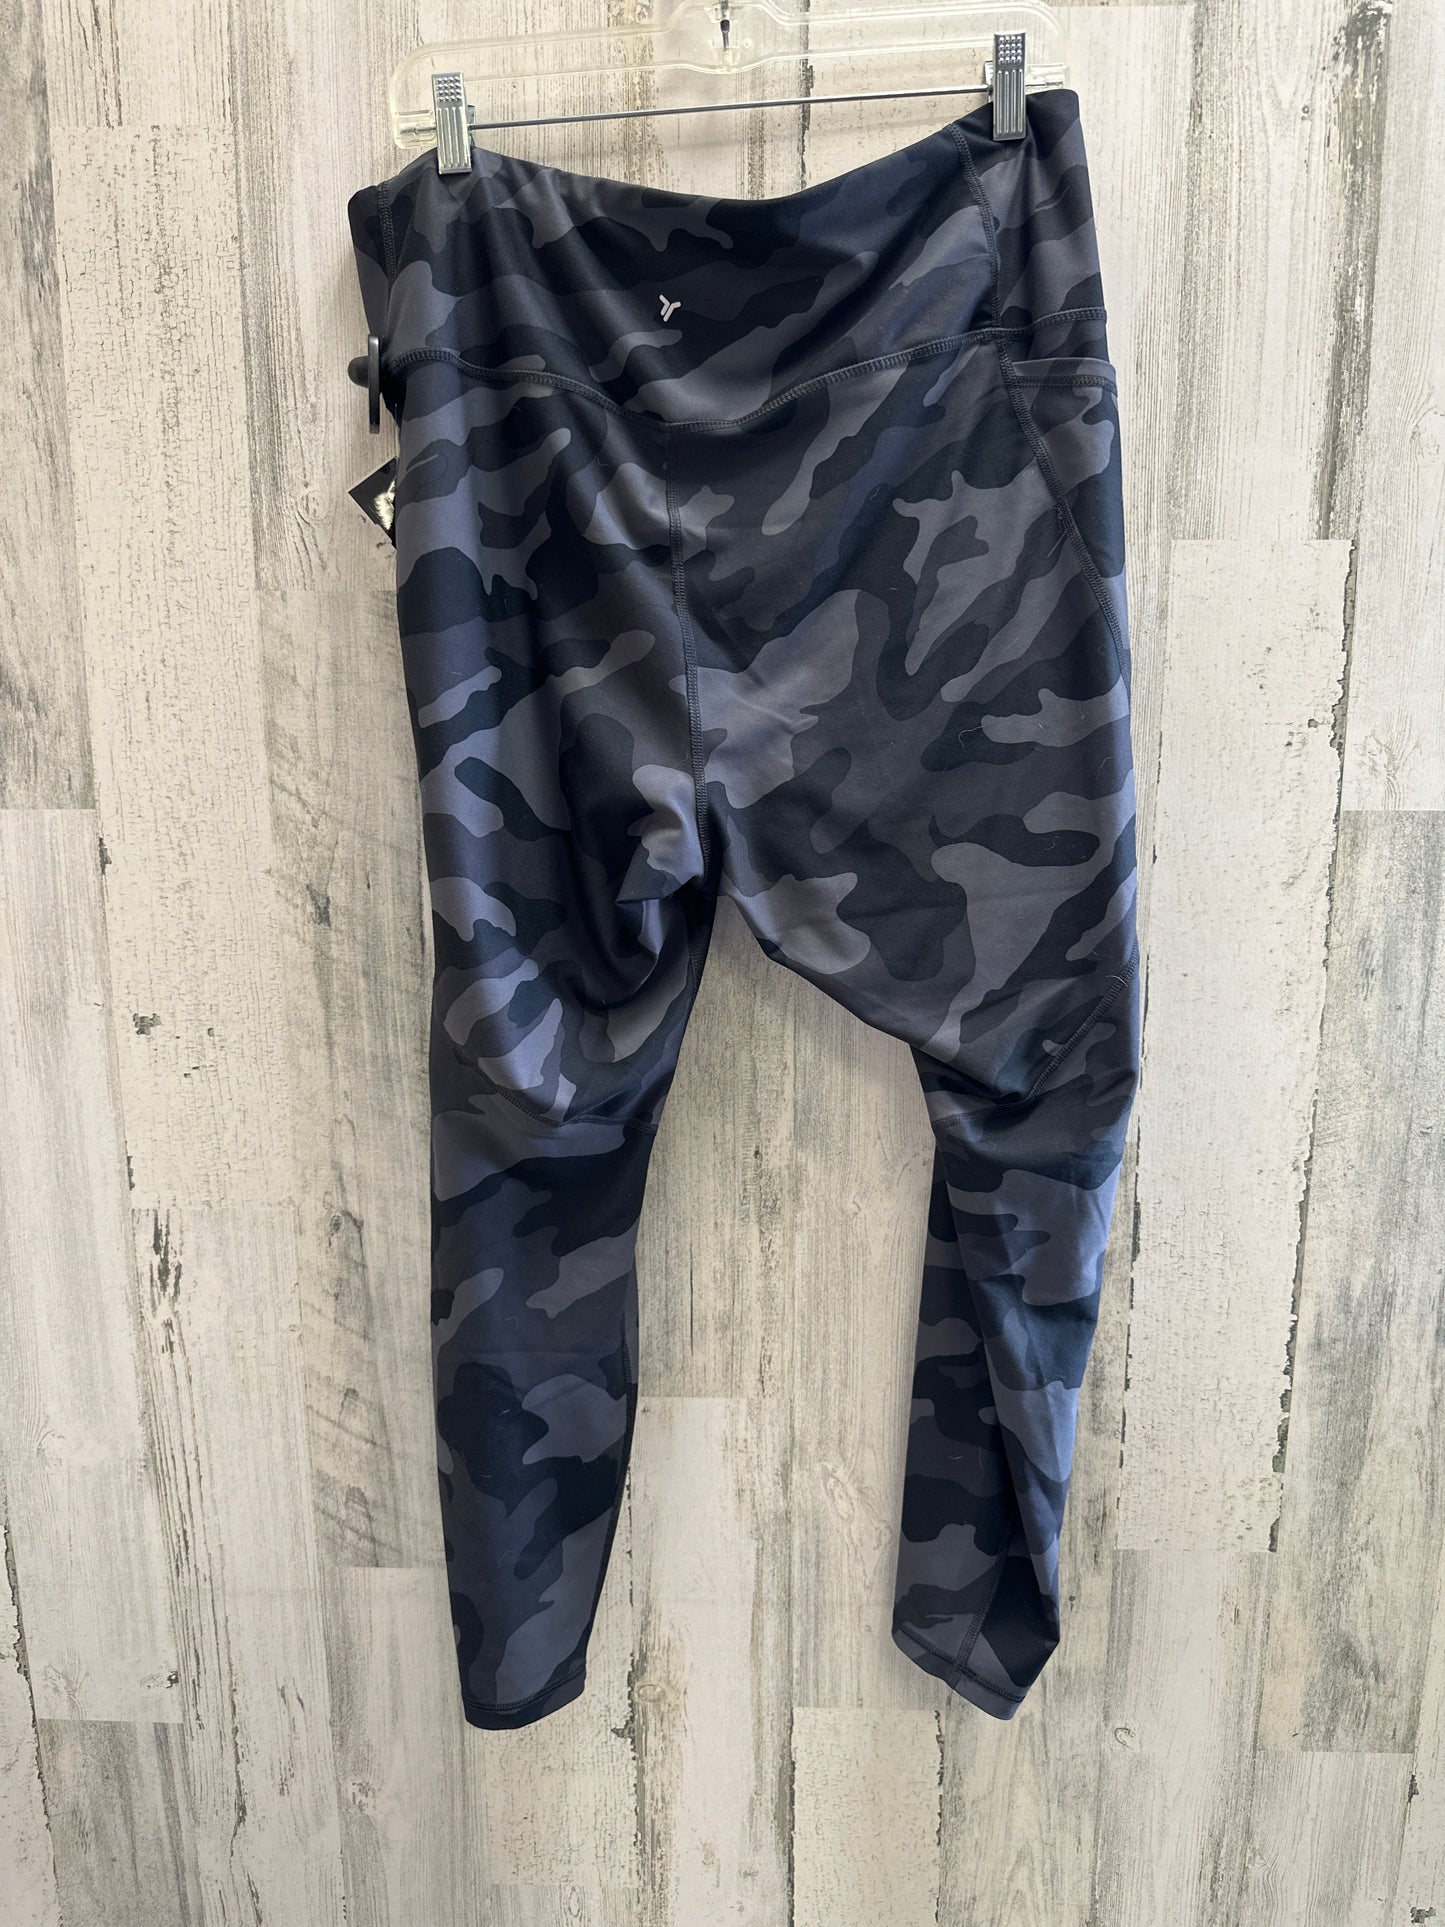 Camouflage Print Athletic Leggings Old Navy, Size 2x